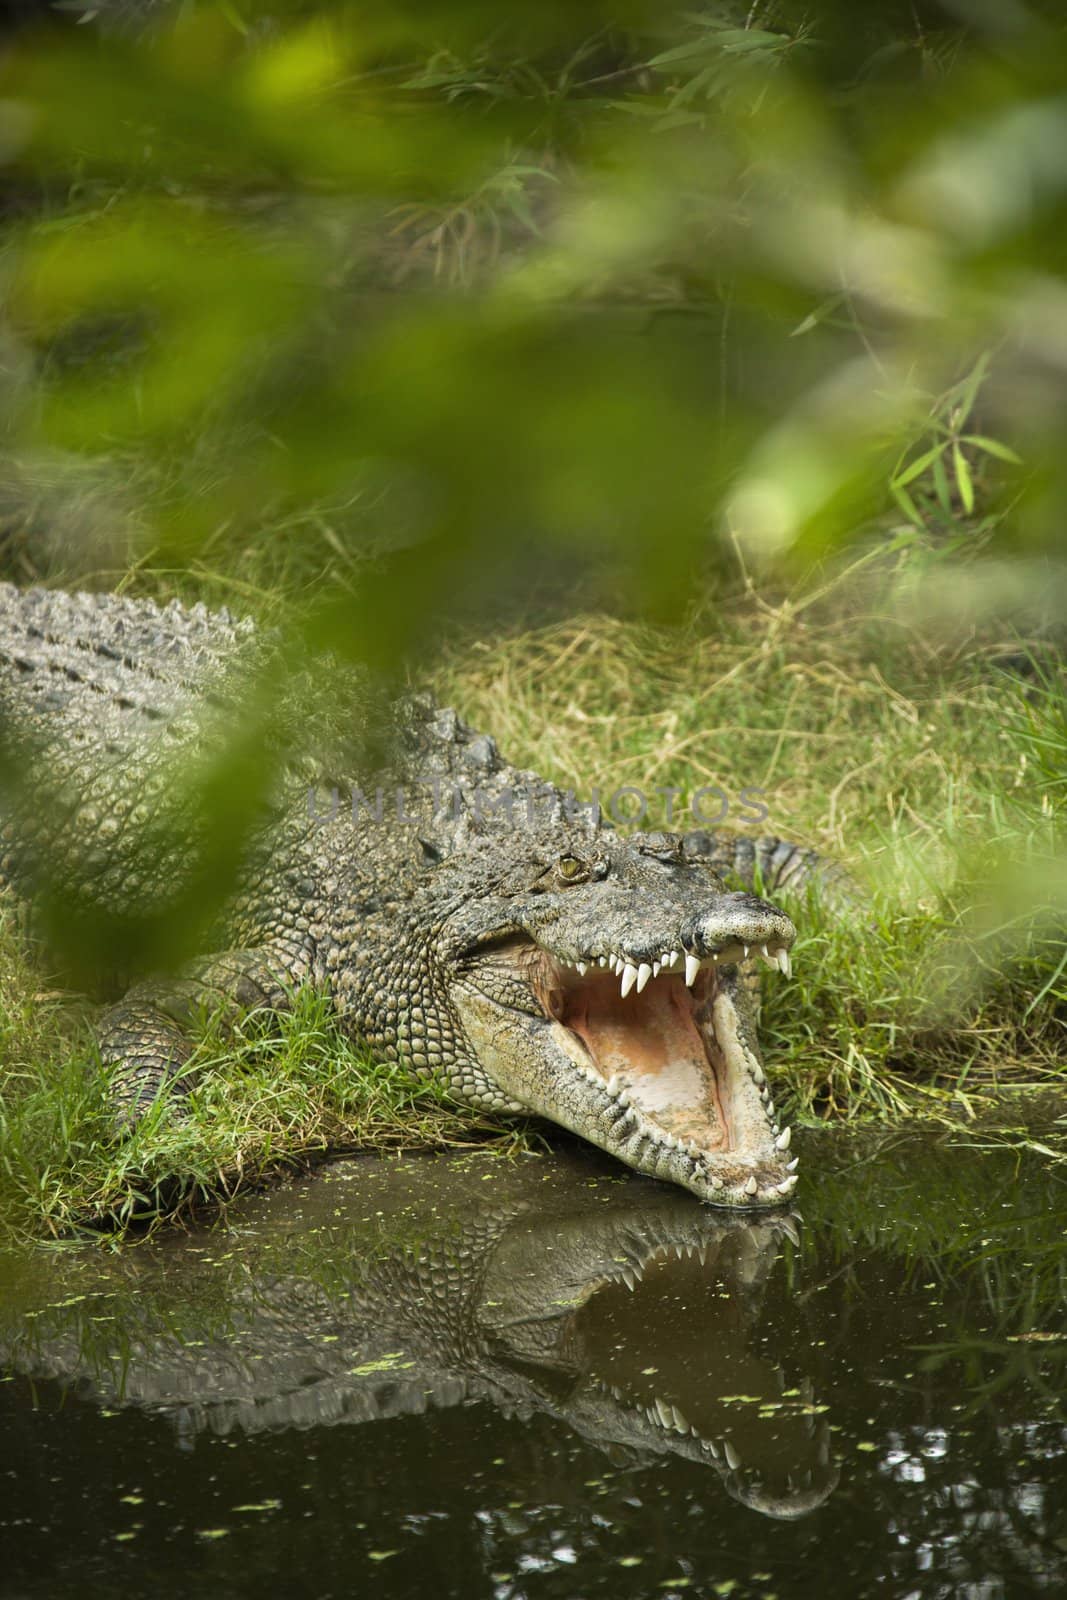 Crocodile opening mouth. by iofoto